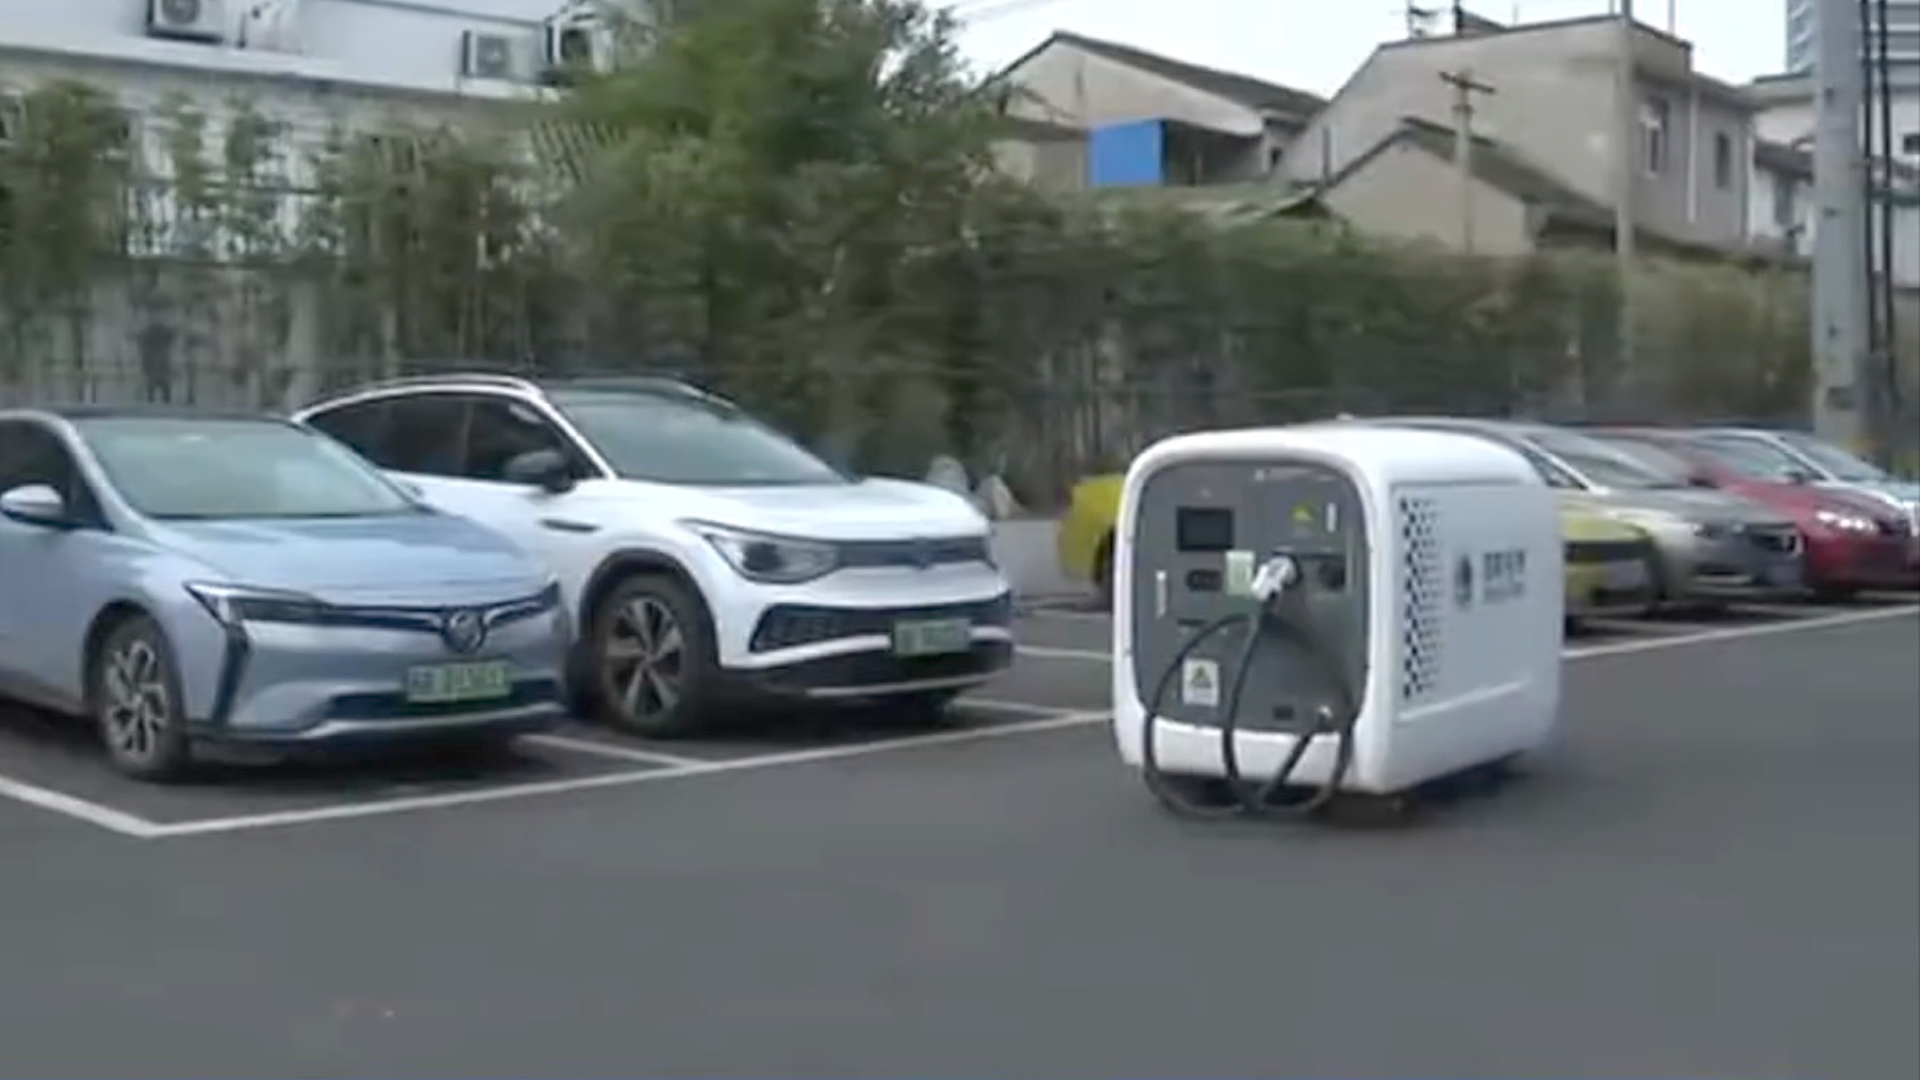 A robotic charger moves to cars that need charging in Wuxi City, east China's Jiangsu Province. /CMG